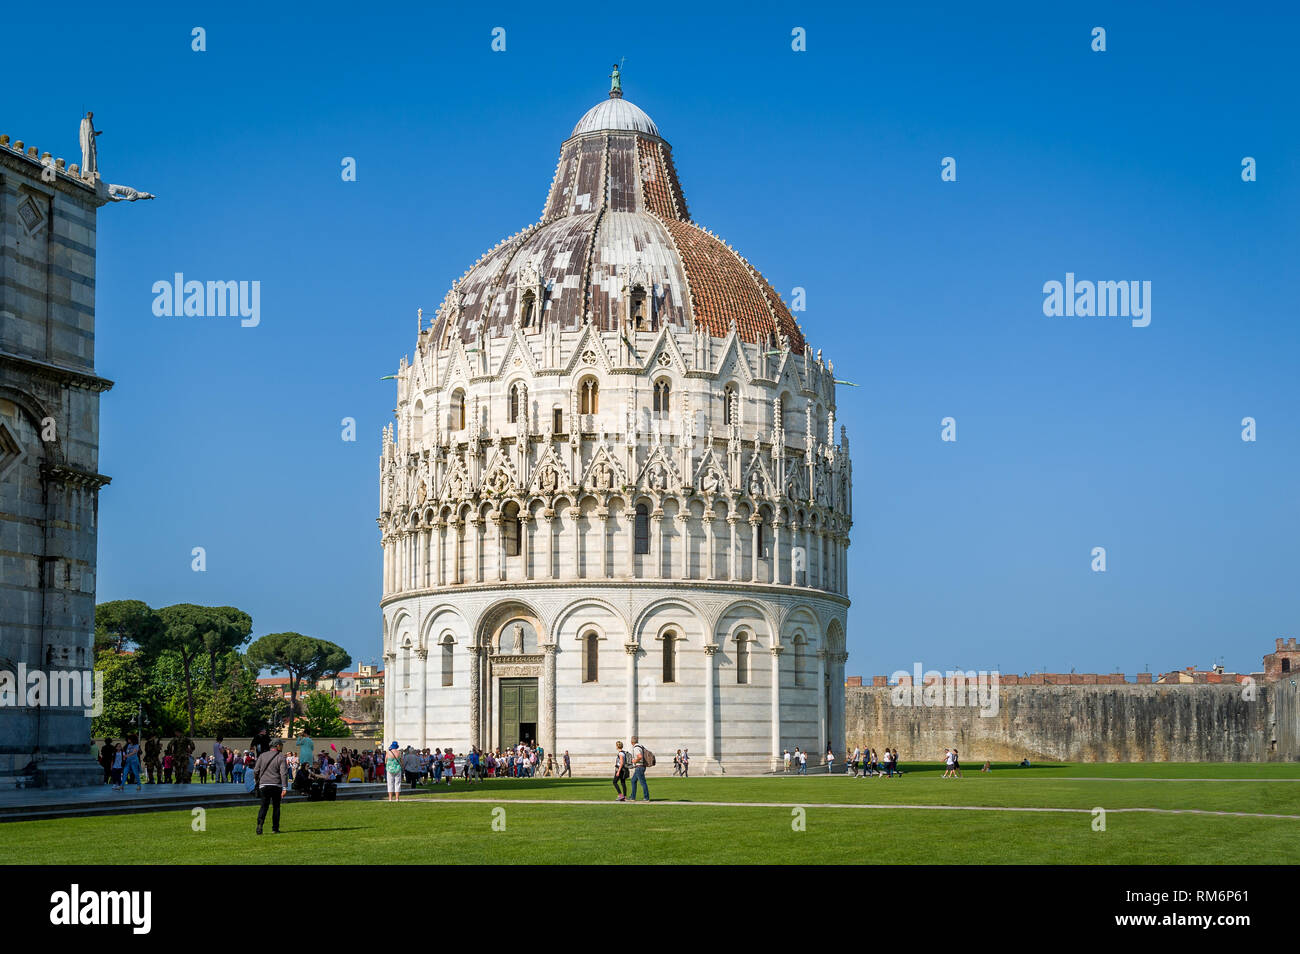 Pisa Baptistery beautiful decorated historic tower and tourists walking at the central square of Pisa. Tuscany, Italy. Stock Photo